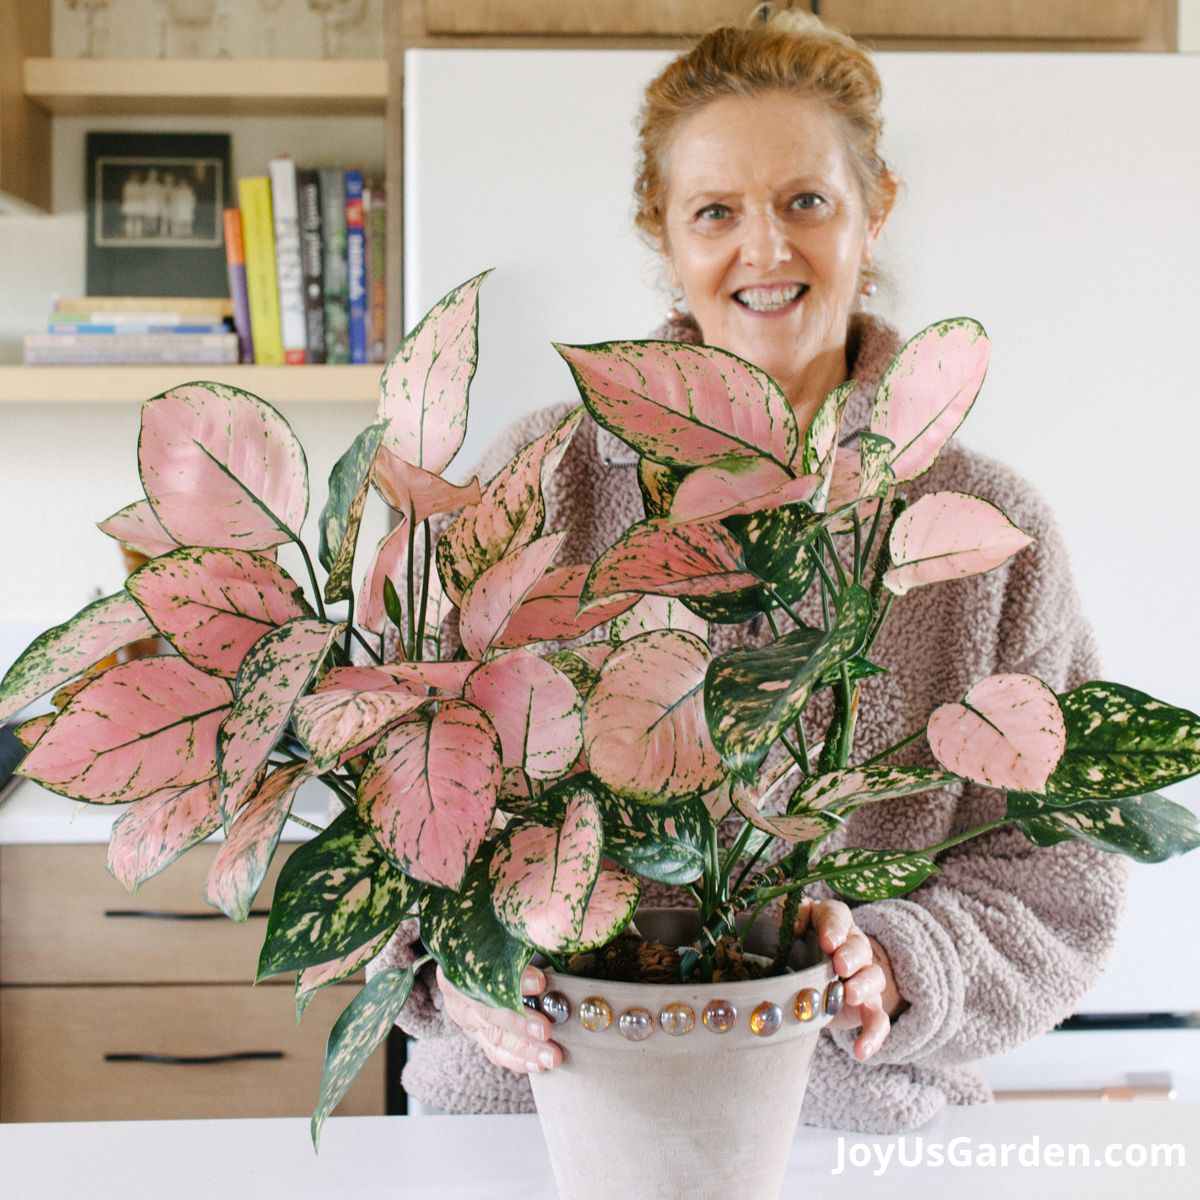 nell foster in her brightly lit kitchen standing with a pink aglaonema lady valentine in clay pot